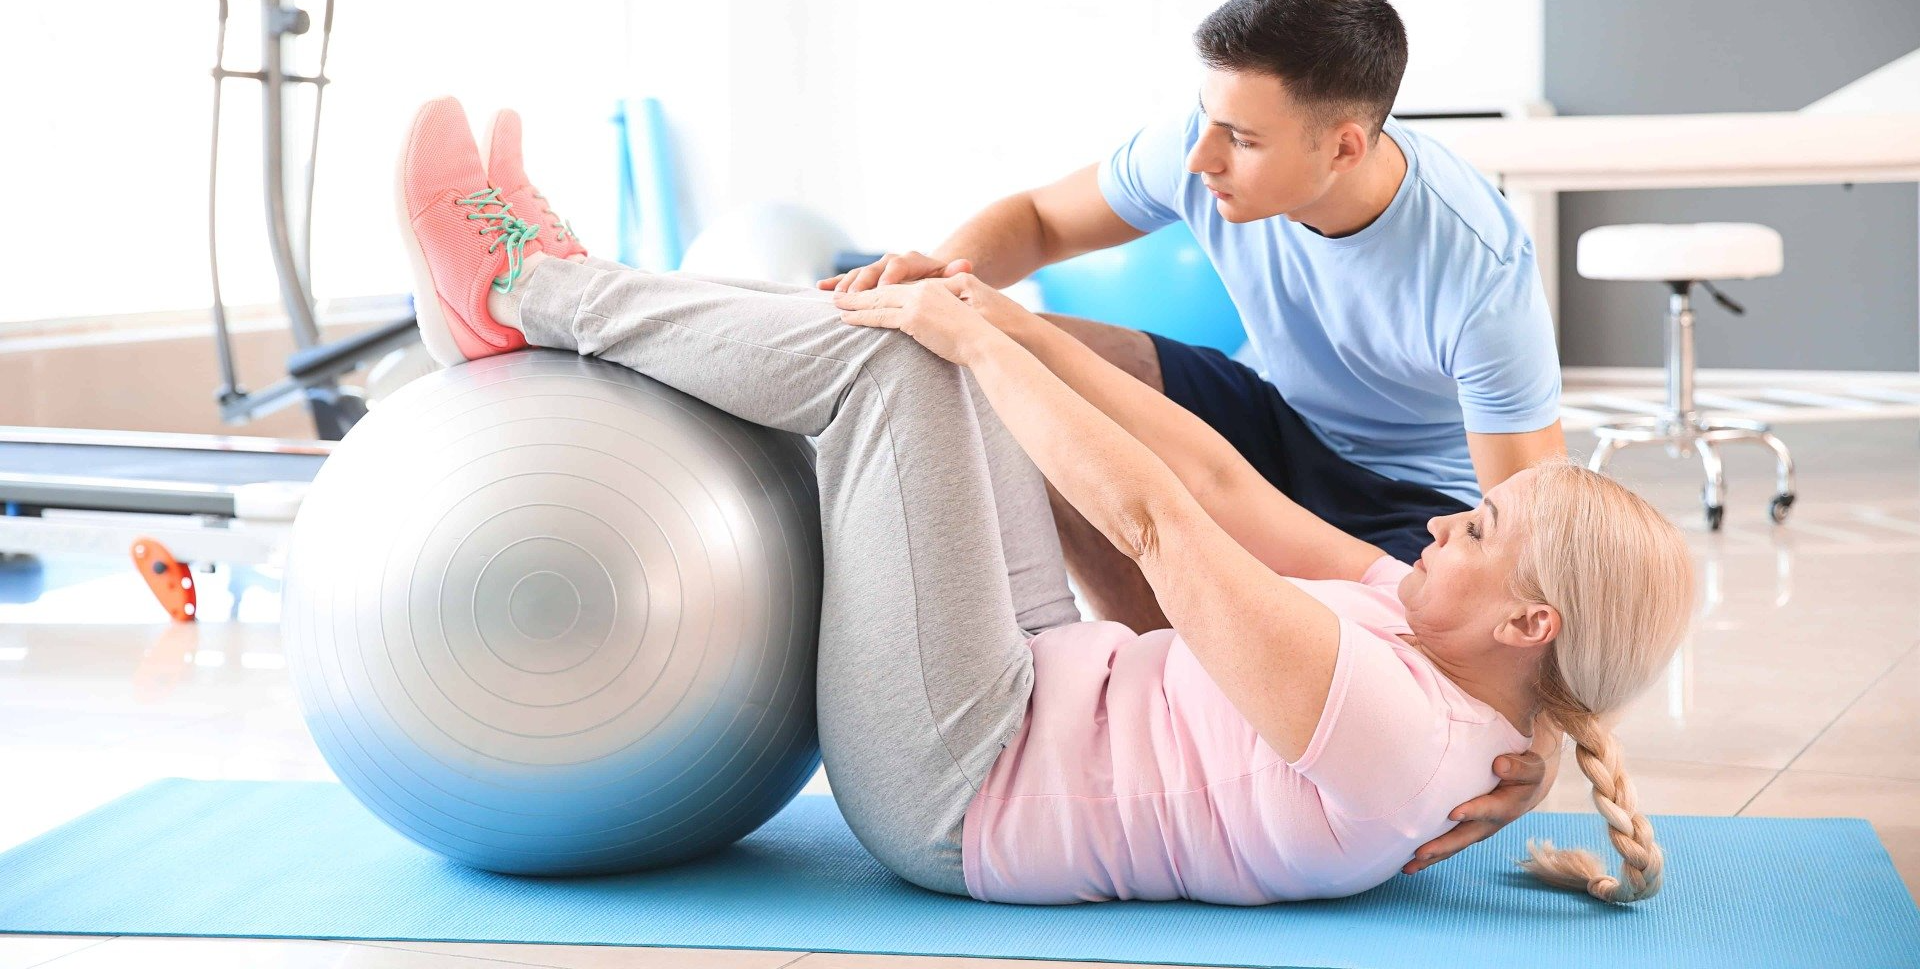 Image of a woman receiving physiotherapy treatment from a male physiotherapist.